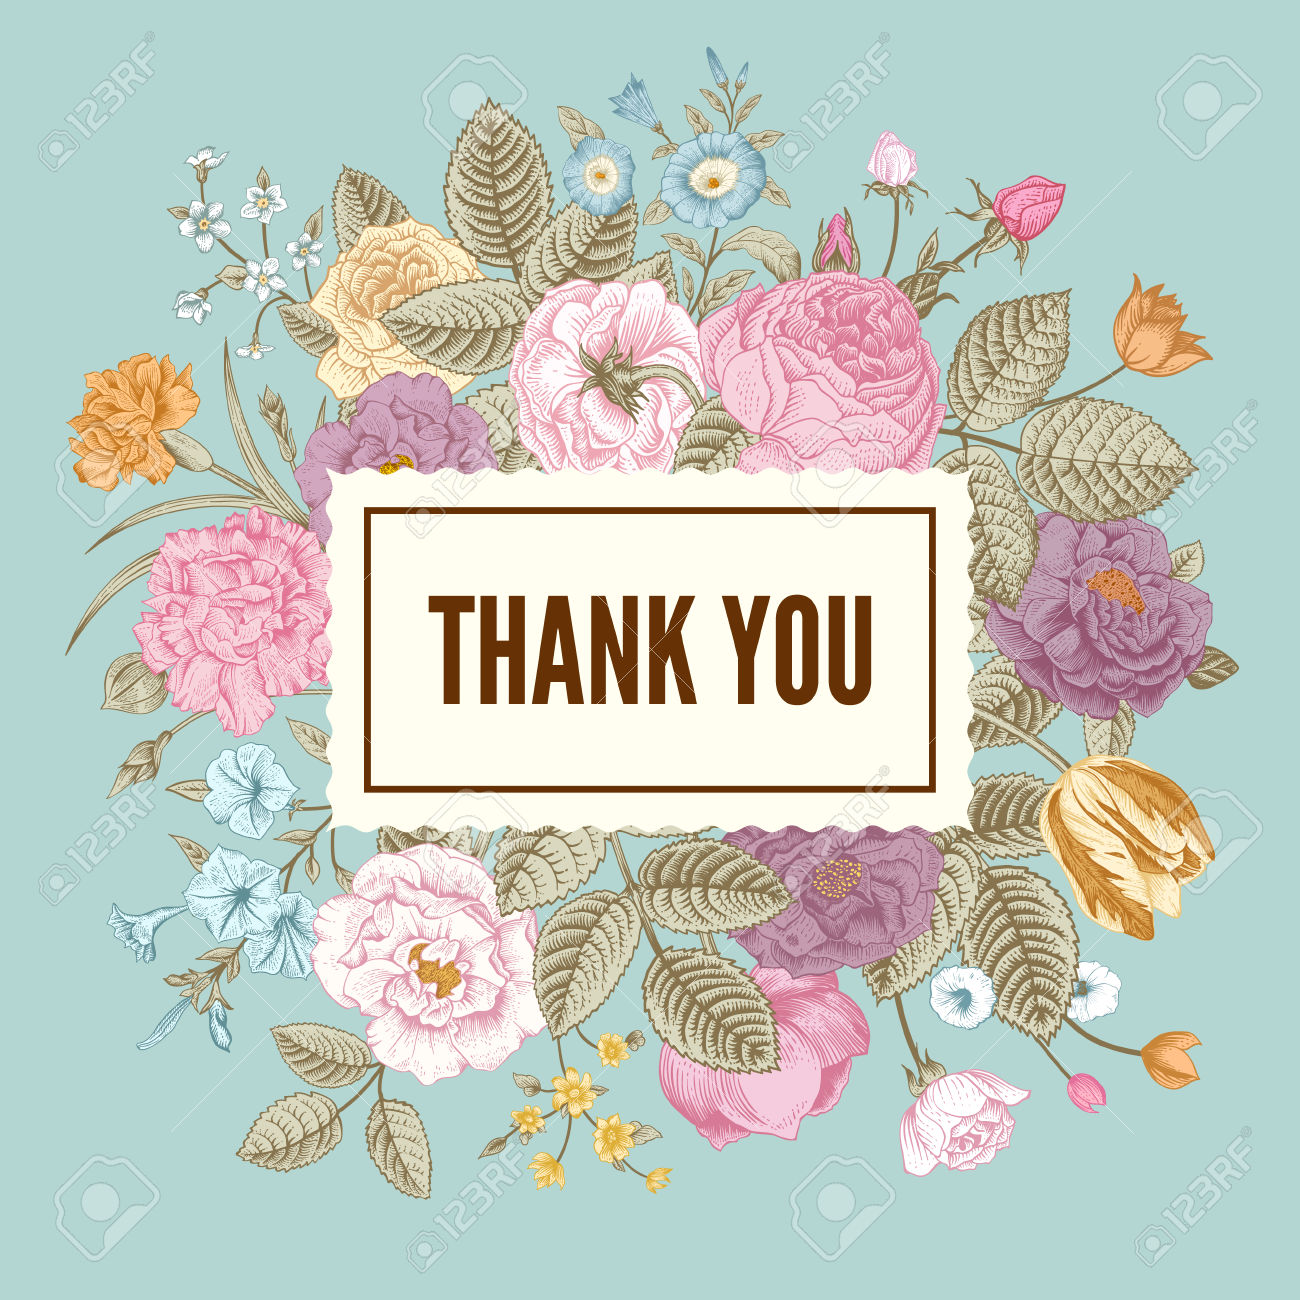 28403748-vintage-floral-vector-elegant-card-with-colorful-summer-garden-flowers-on-mint-background-thank-you--stock-vector.jpg